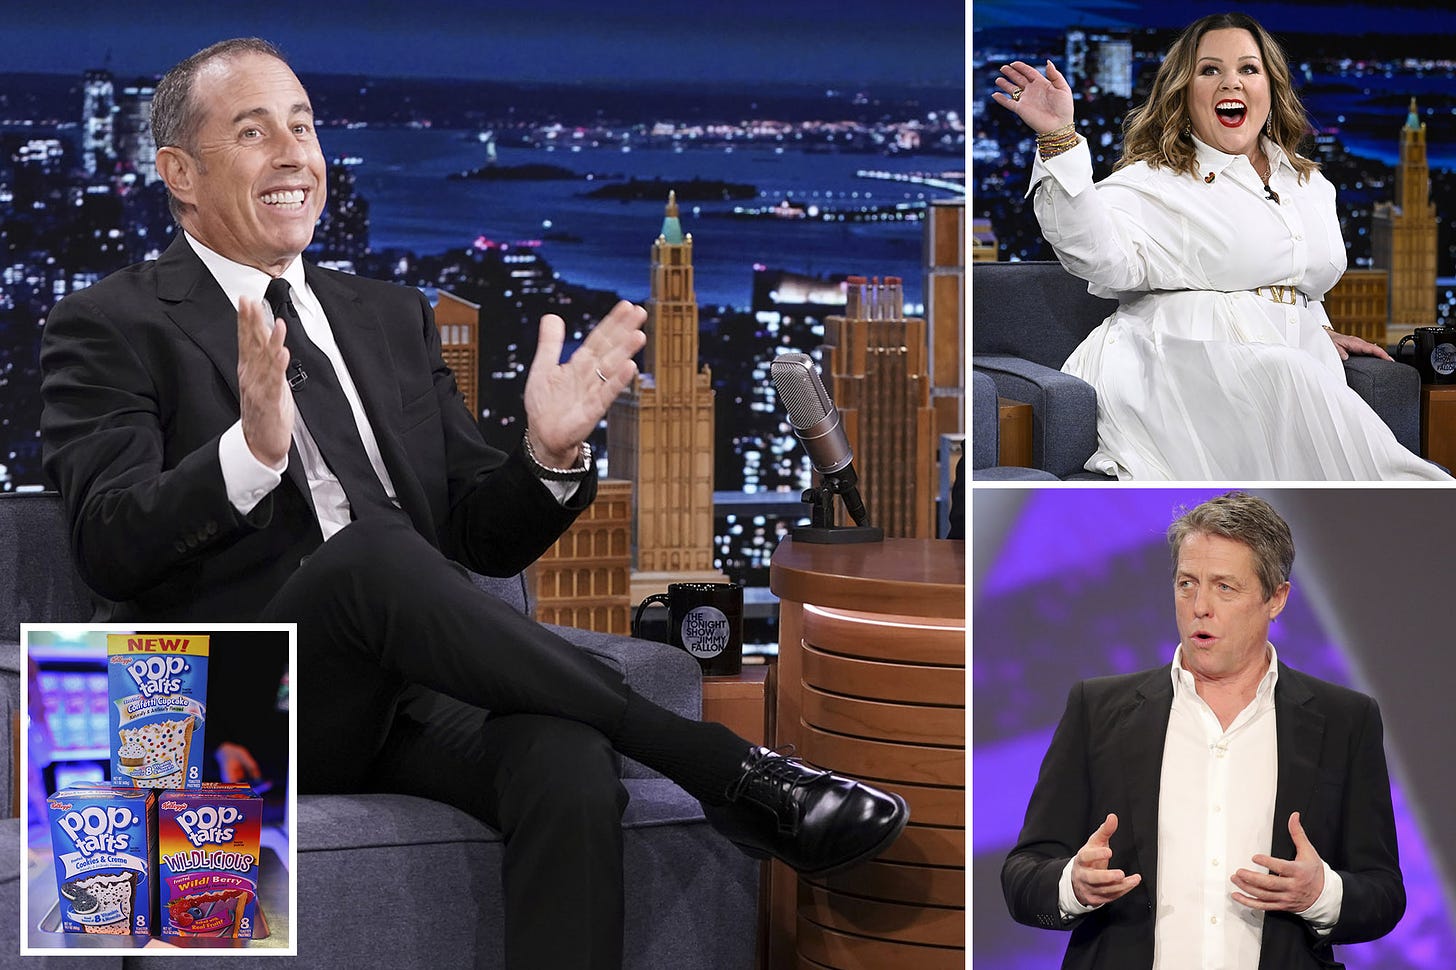 Jerry Seinfeld's 1st film in 15 years about Pop-Tarts gets cast